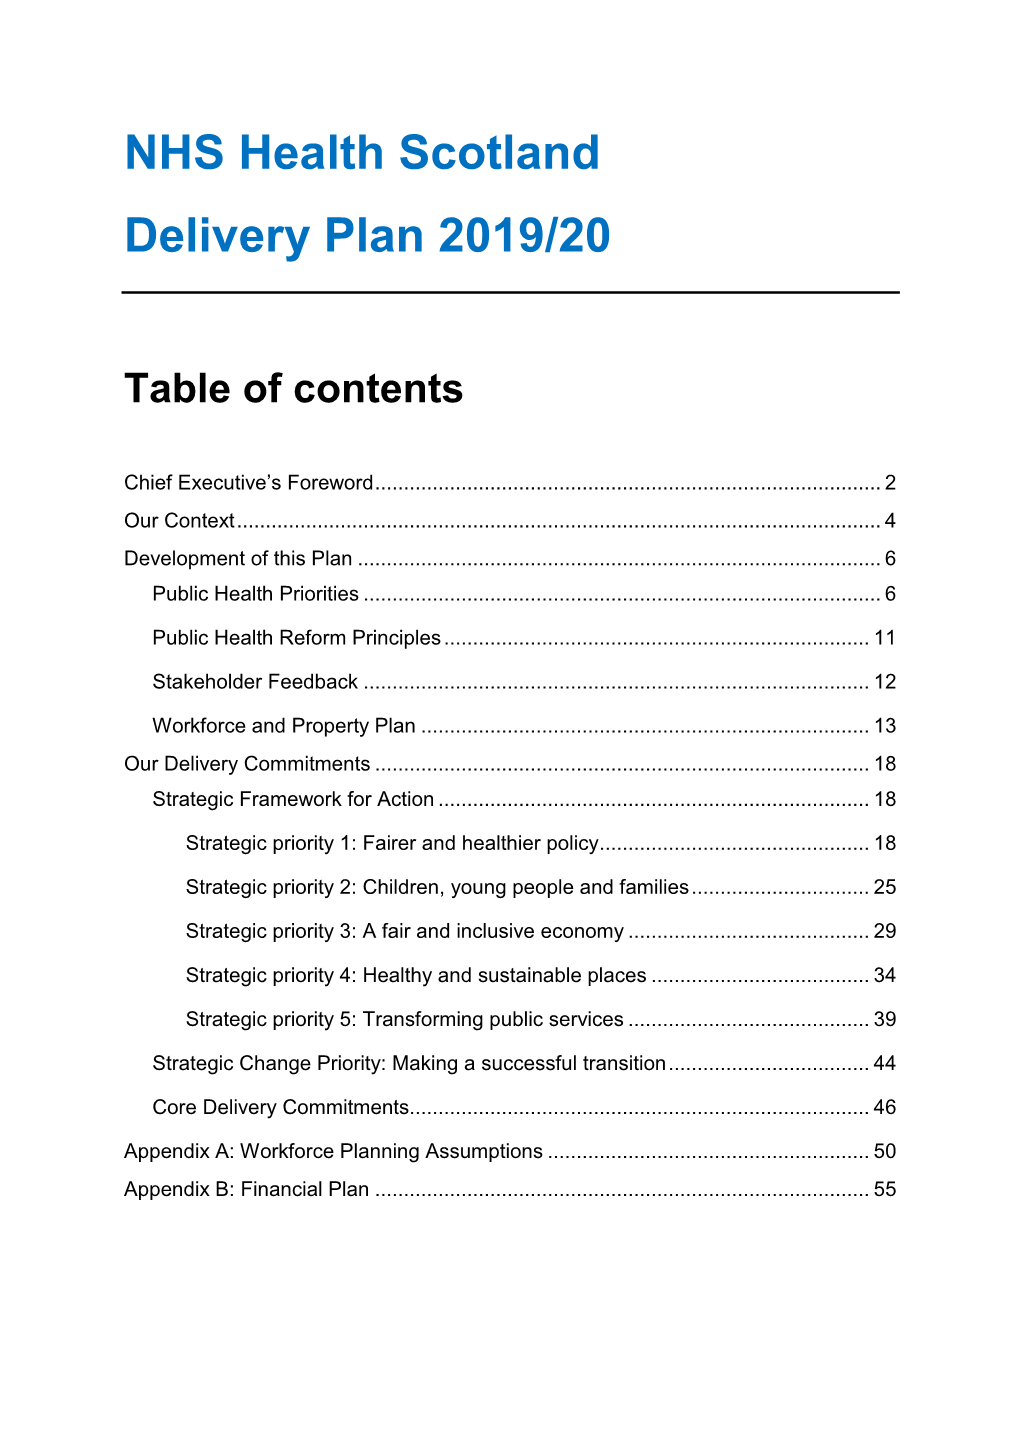 NHS Health Scotland Delivery Plan 2019/20